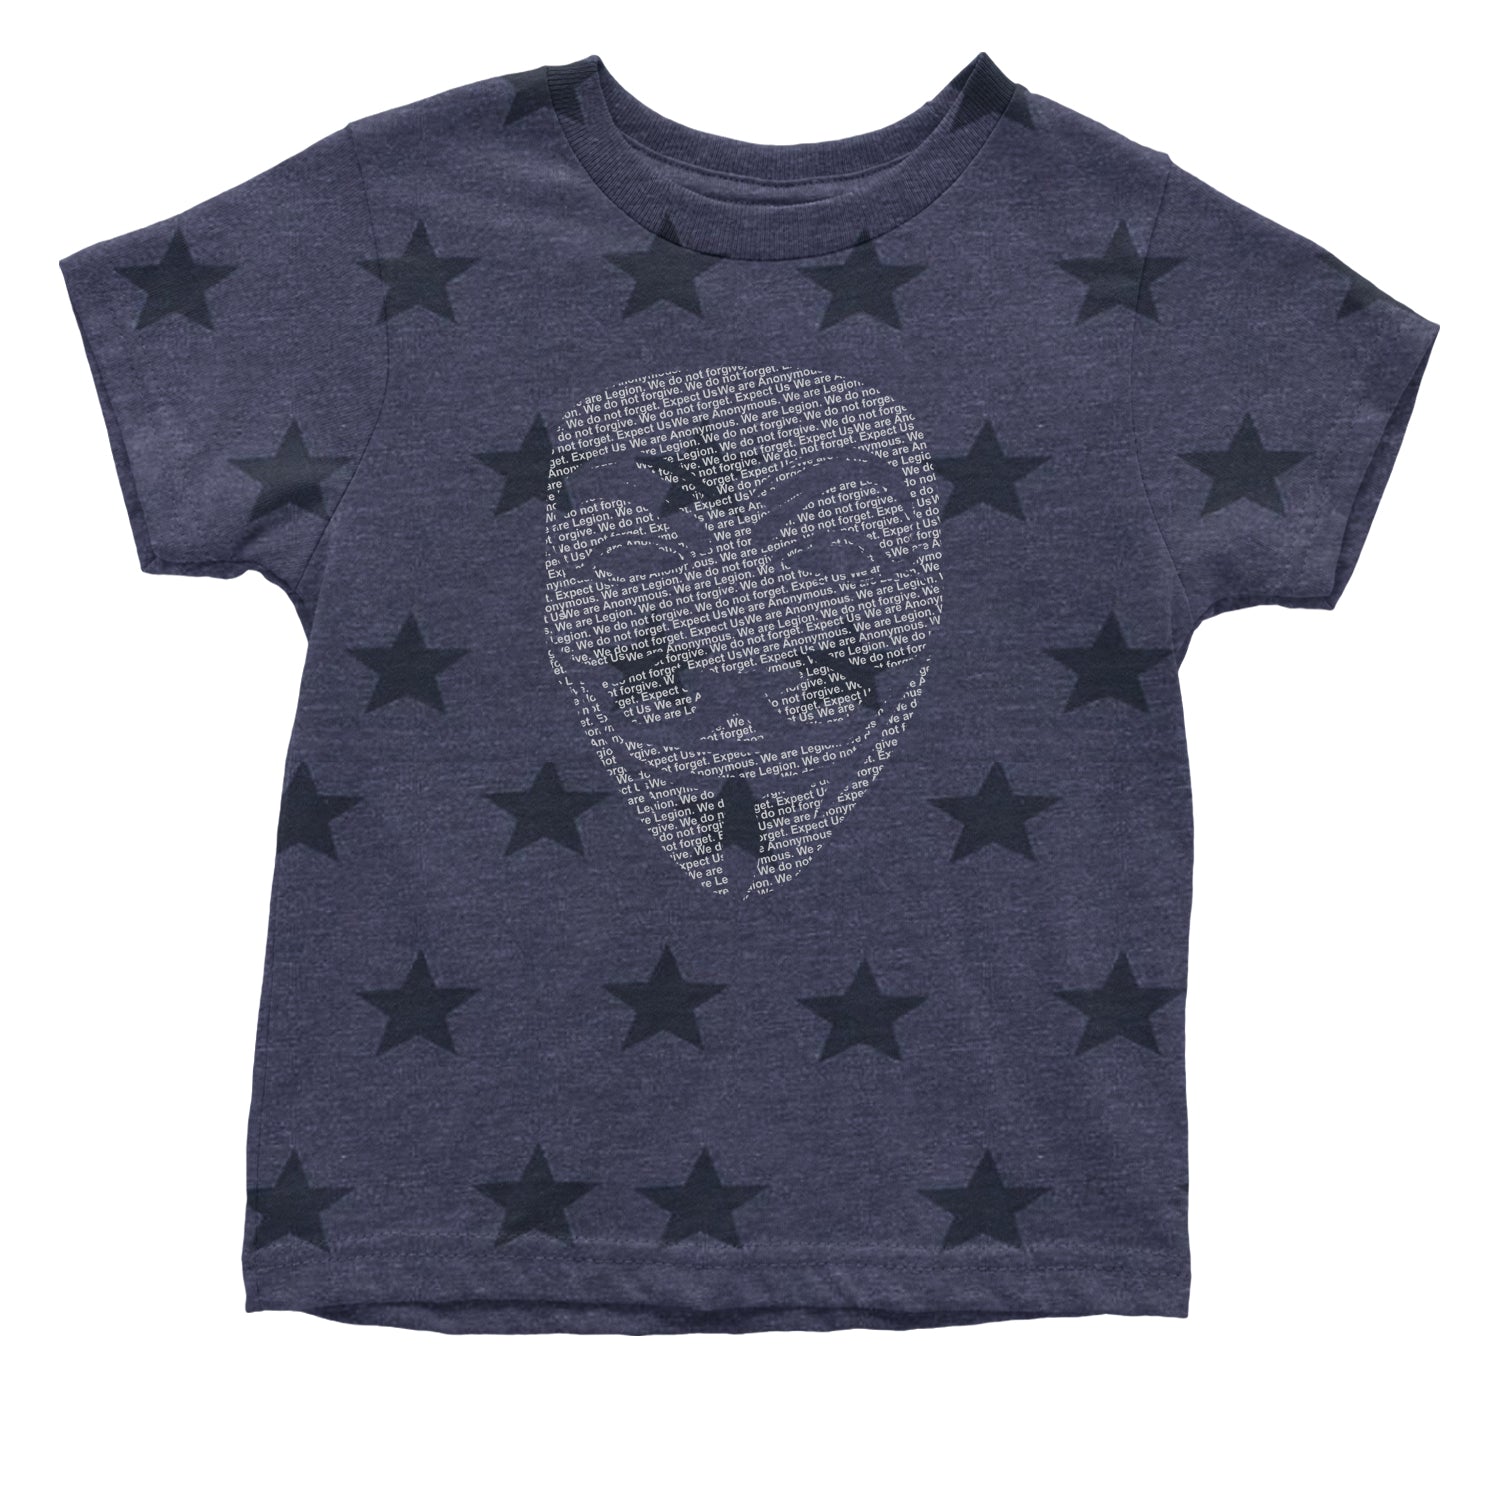 V For Vendetta Anonymous Mask Infant One-Piece Romper Bodysuit and Toddler T-shirt #expressiontees by Expression Tees